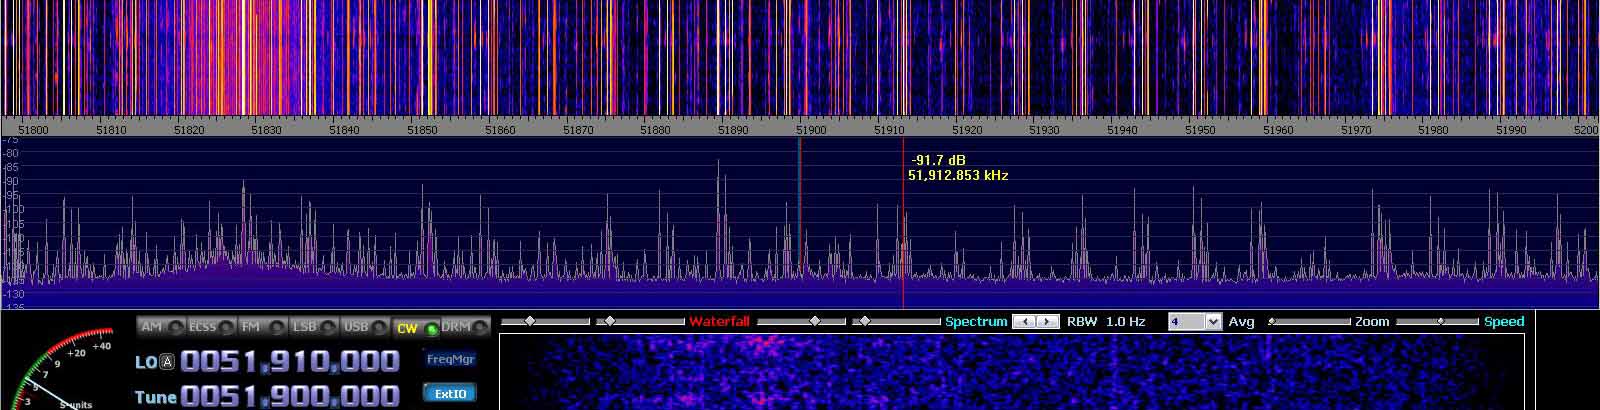 2014-07-04 51.900 MHz +- 100 kHz - Strong Es - 4-el dipole array with ends to St P - (c) OH7HJ.JPG